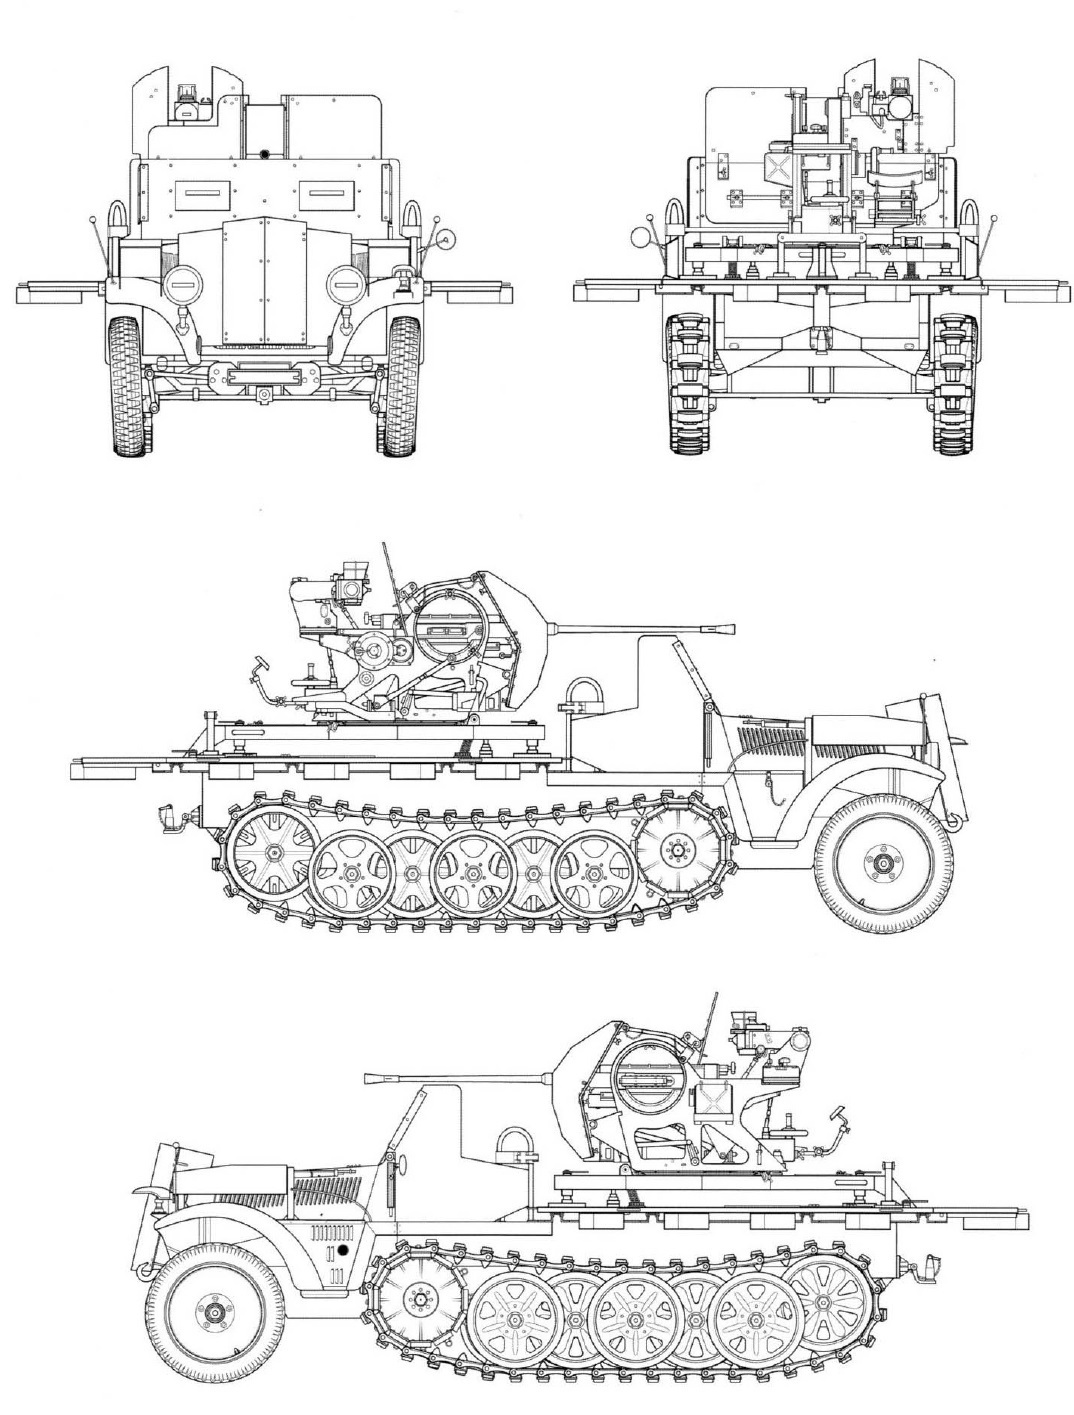 Tank Archives: A Light and Simple SPAAG